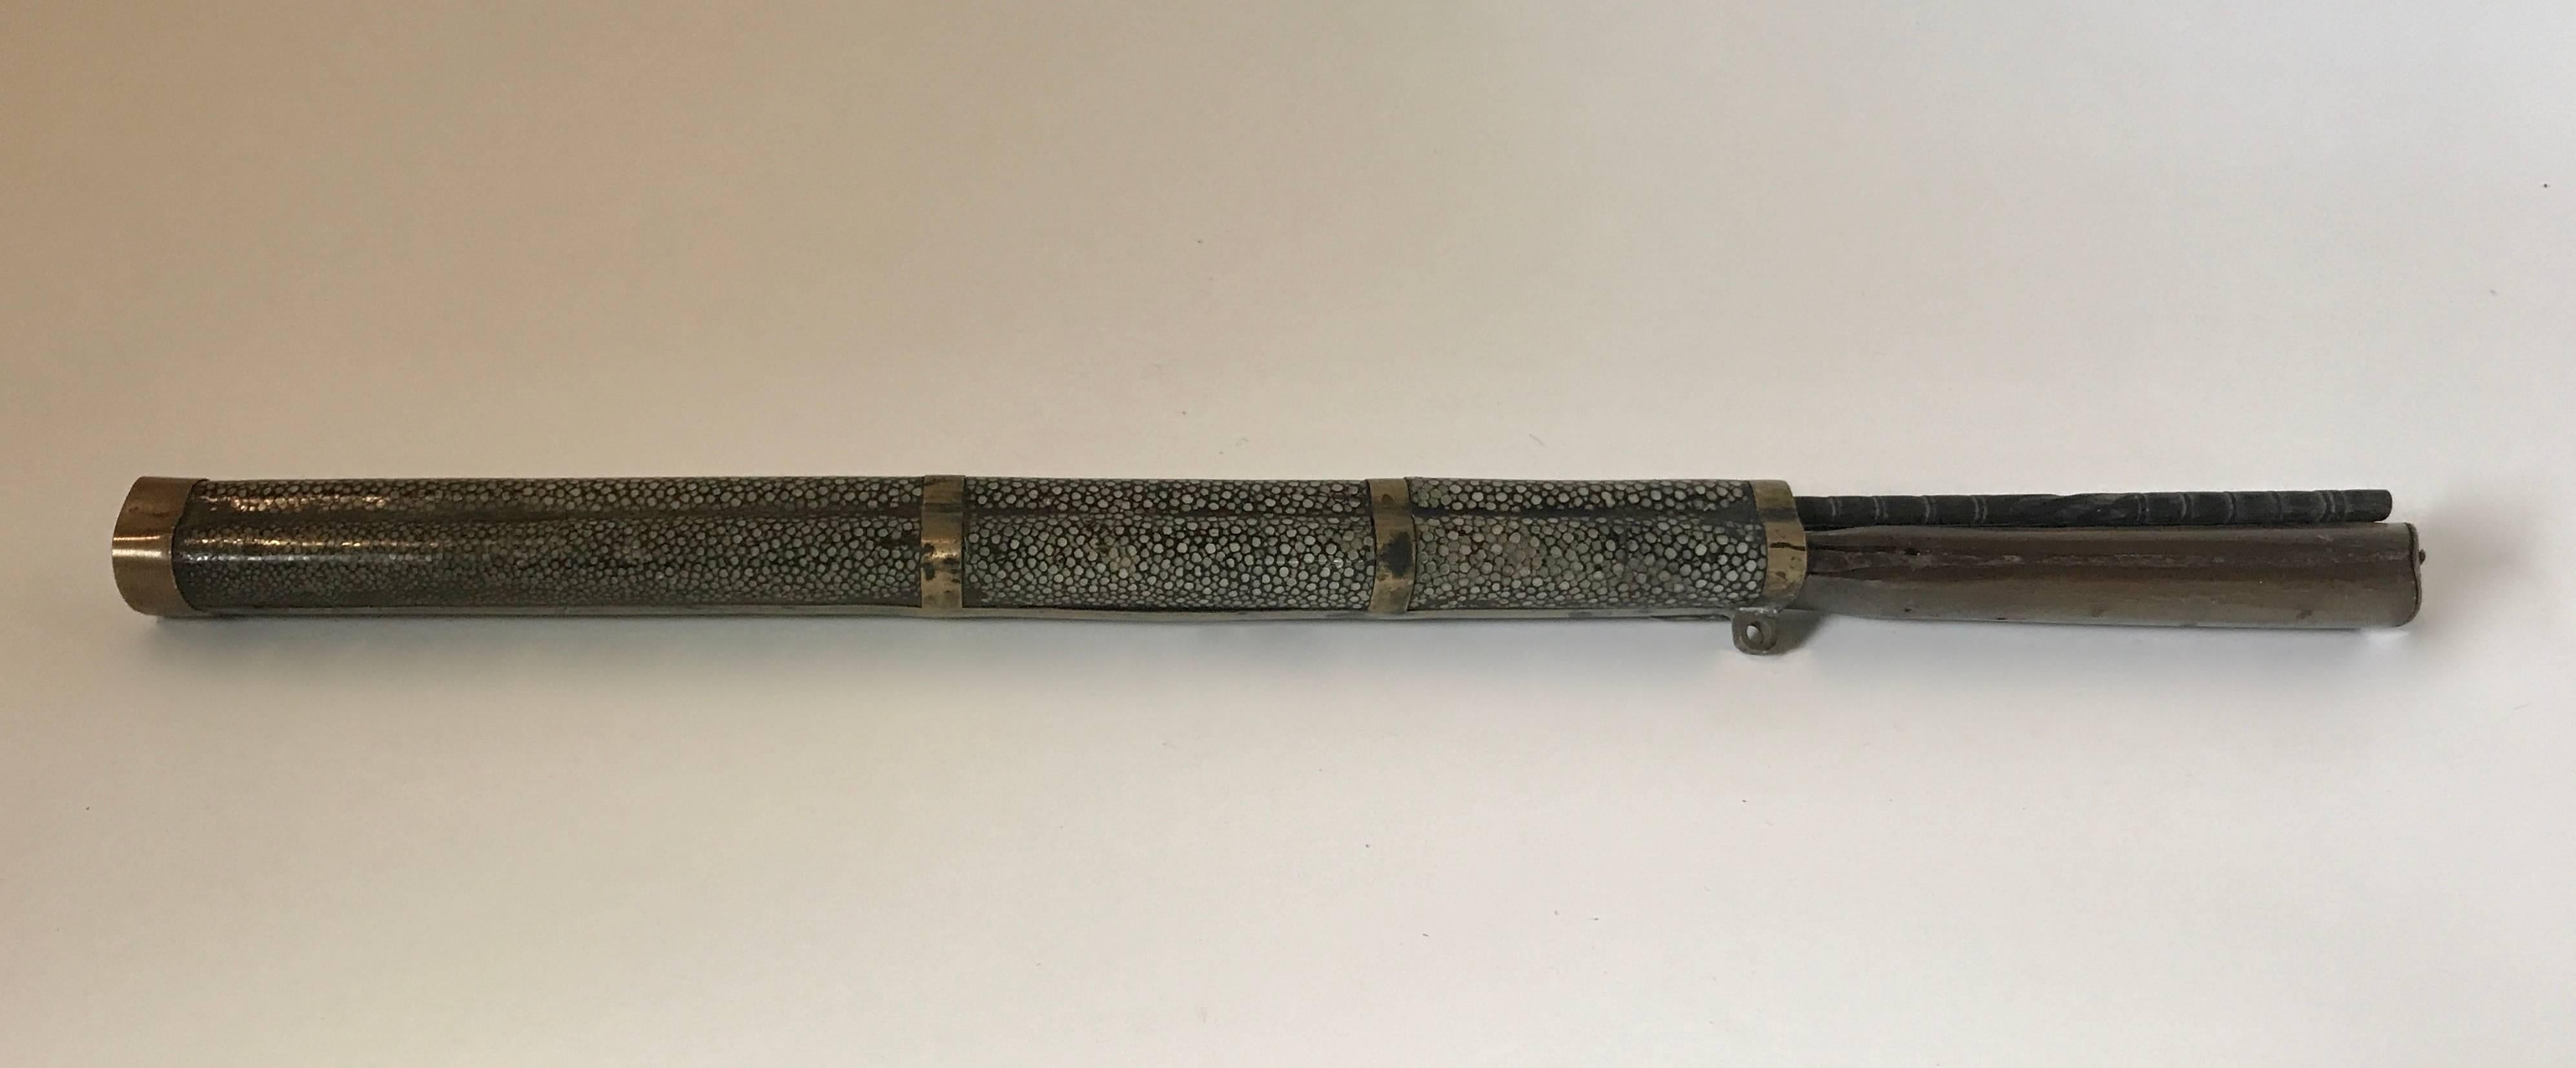 18th century shagreen cutlery case with knife and pair of chopsticks.